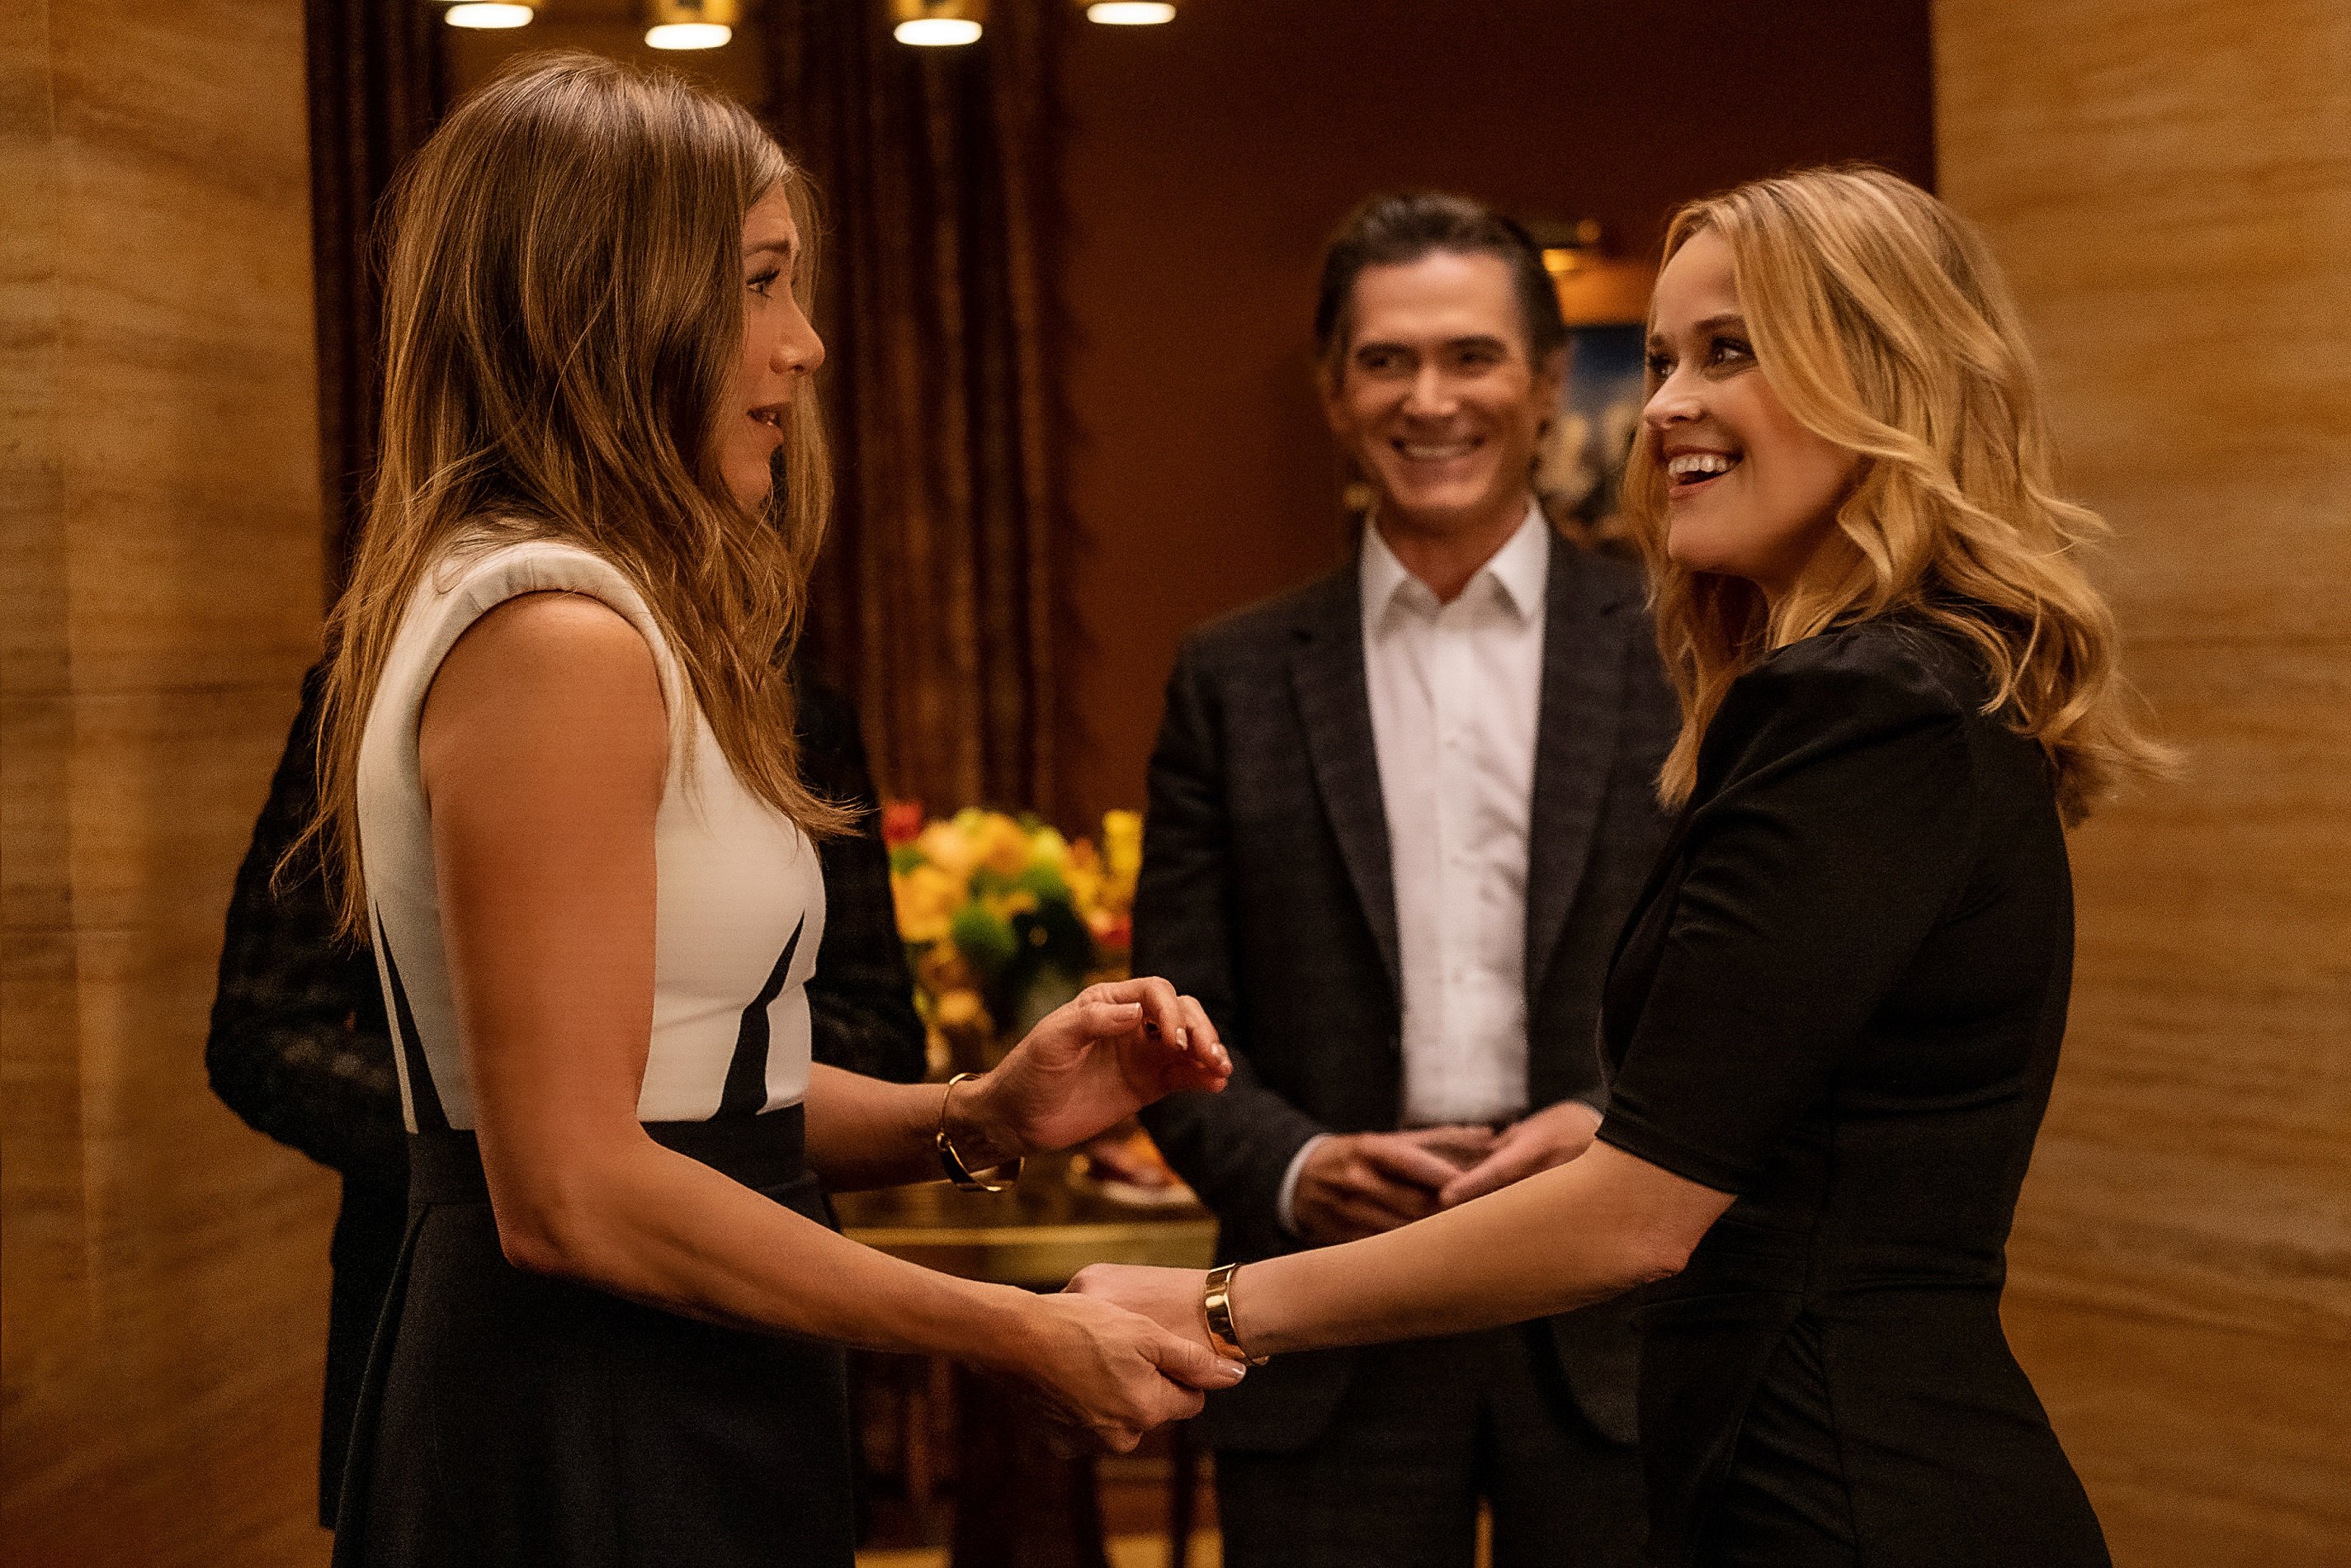 'The Morning Show' stars Jennifer Aniston and Reese Witherspoon hold hands as Billy Crudup smiles in a scene from season 2